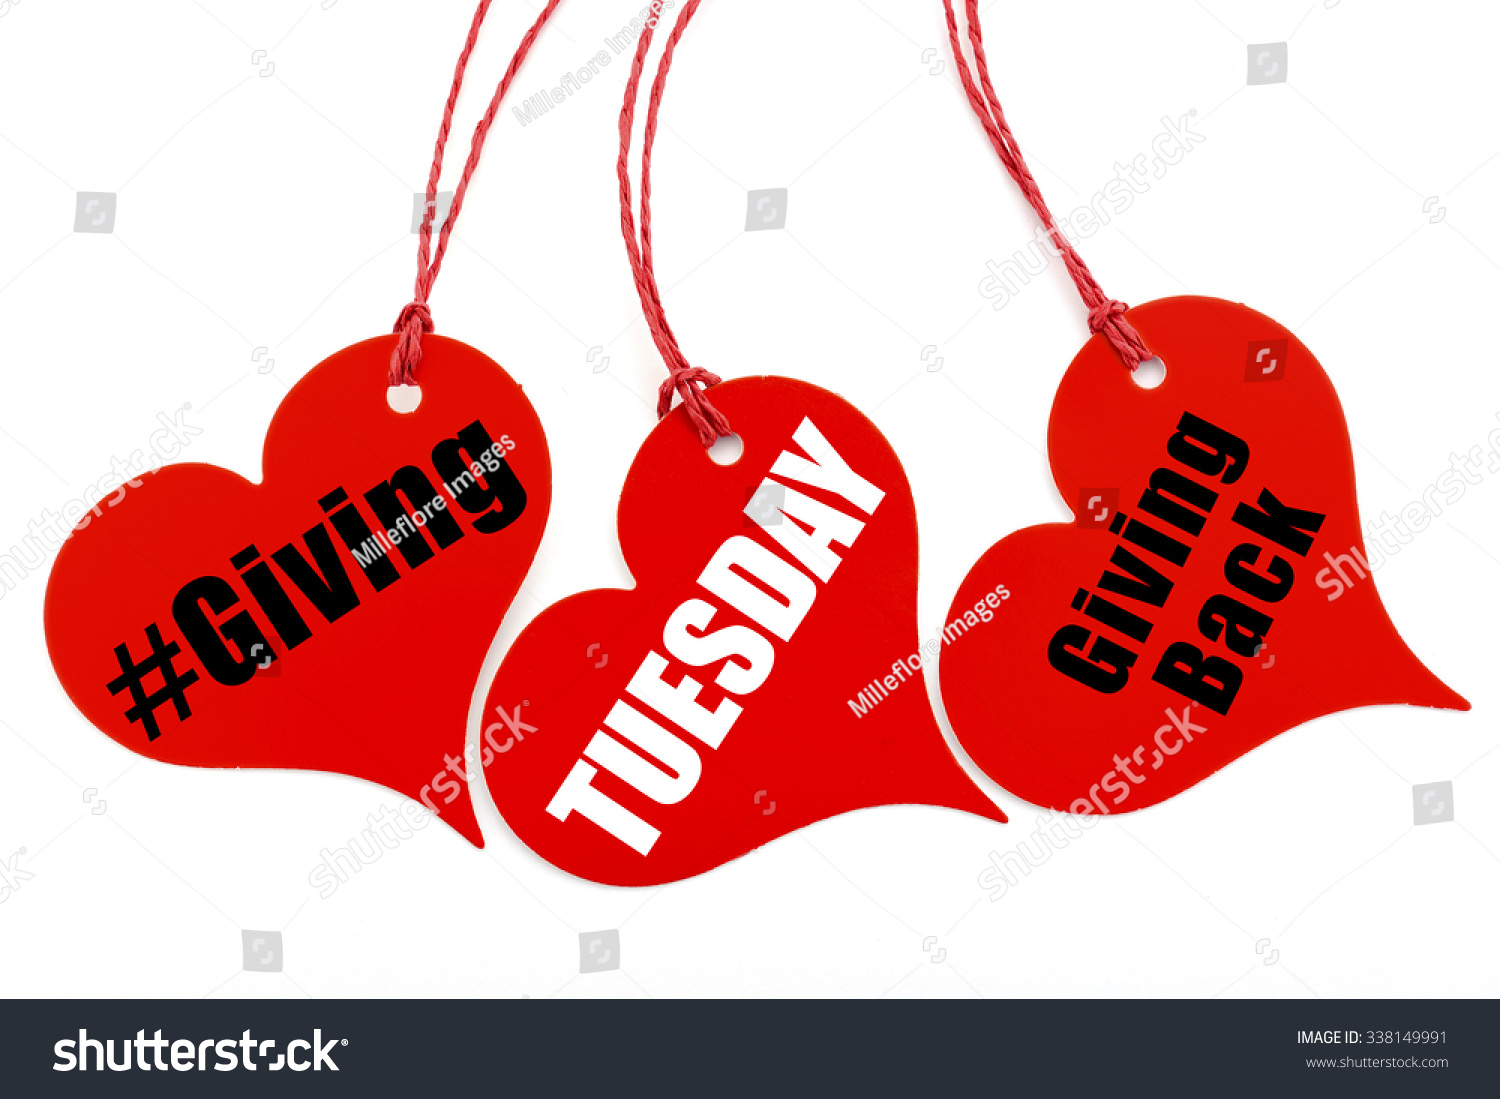 Giving Tuesday red heart shape ticket, with sample text on white background.  #338149991